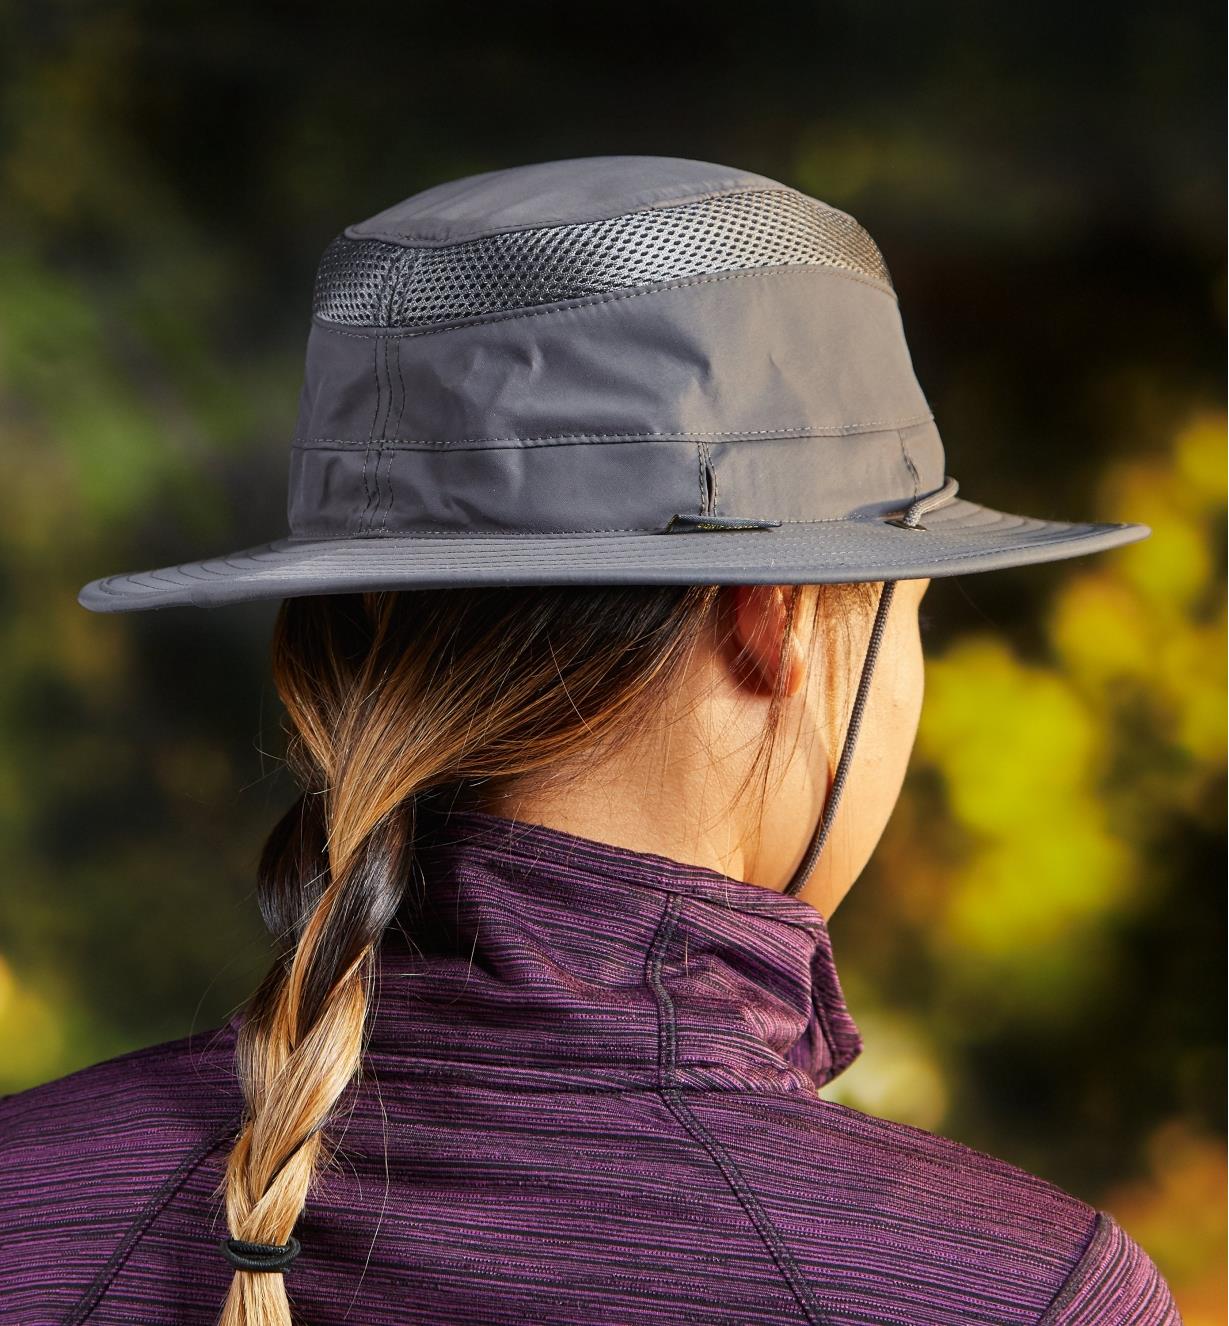 Back view of the classic travel hat